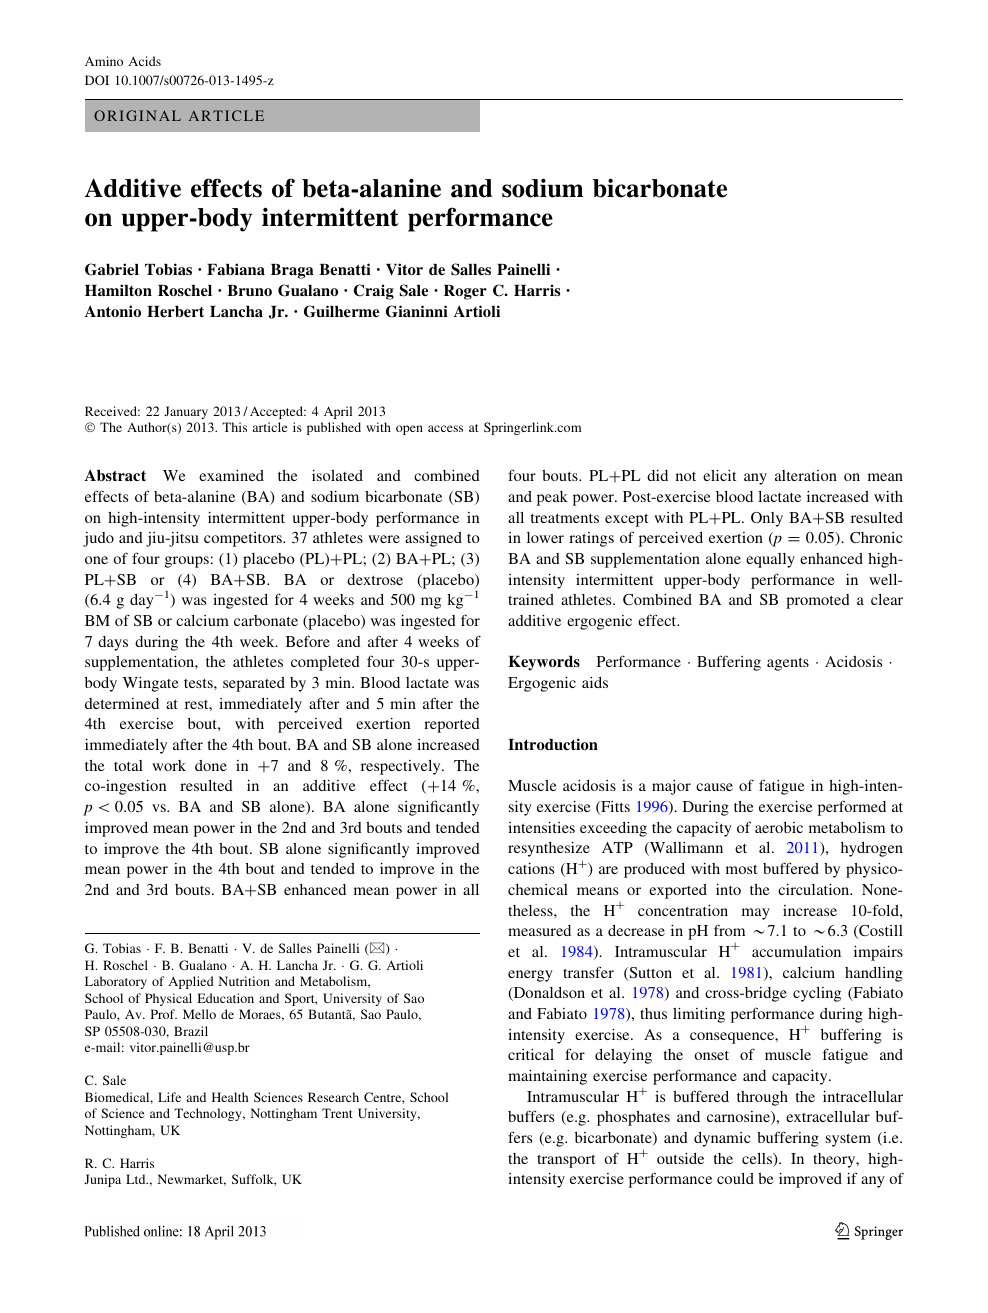 Additive Effects Of Beta Alanine And Sodium Bicarbonate On Upper Body Intermittent Performance Topic Of Research Paper In Health Sciences Download Scholarly Article Pdf And Read For Free On Cyberleninka Open Science Hub